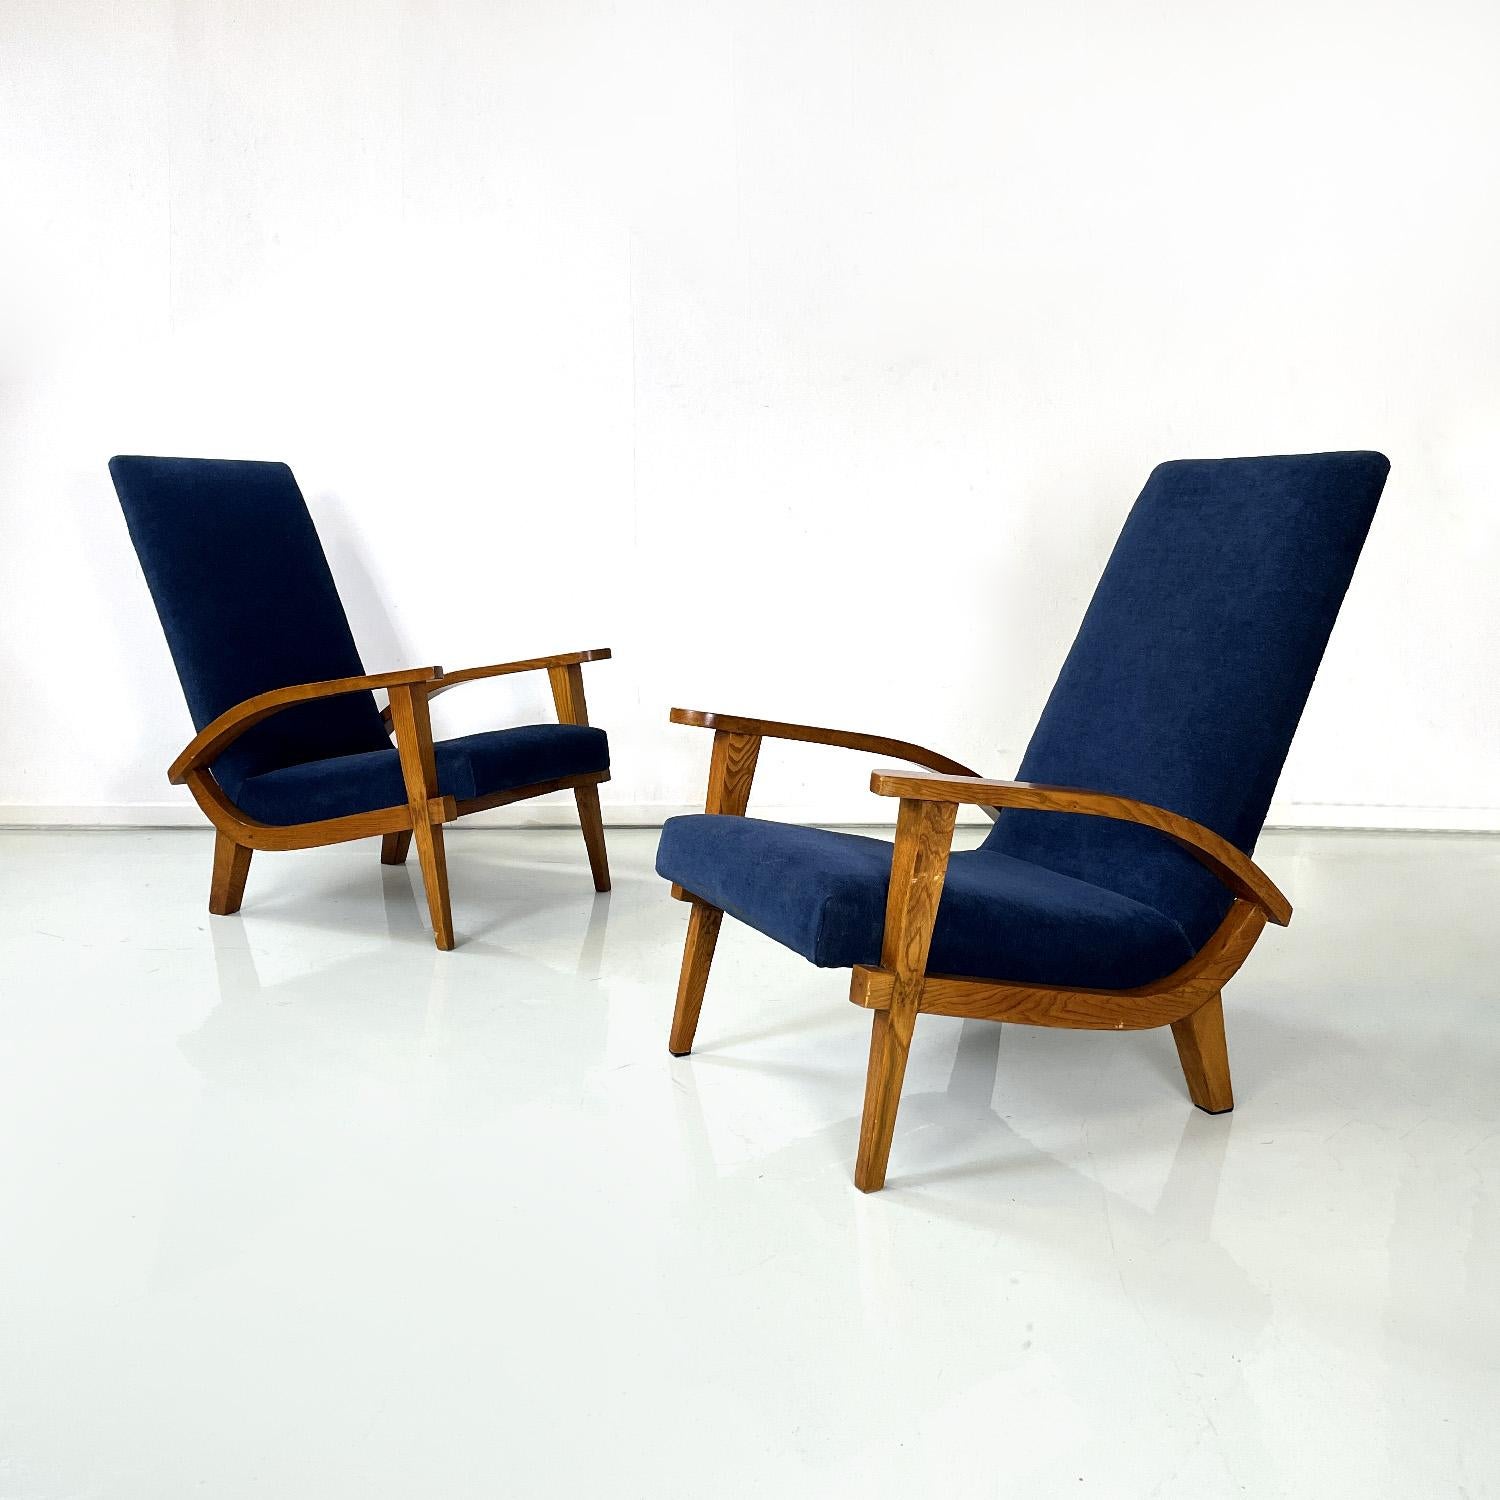 Italian mid-century modern wood and blue fabric armchairs, 1950s
Pair of armchairs with wooden structure and deep blue fabric. The structure has a square section, the armrests curve towards the backrest and joins the seat structure. The two front